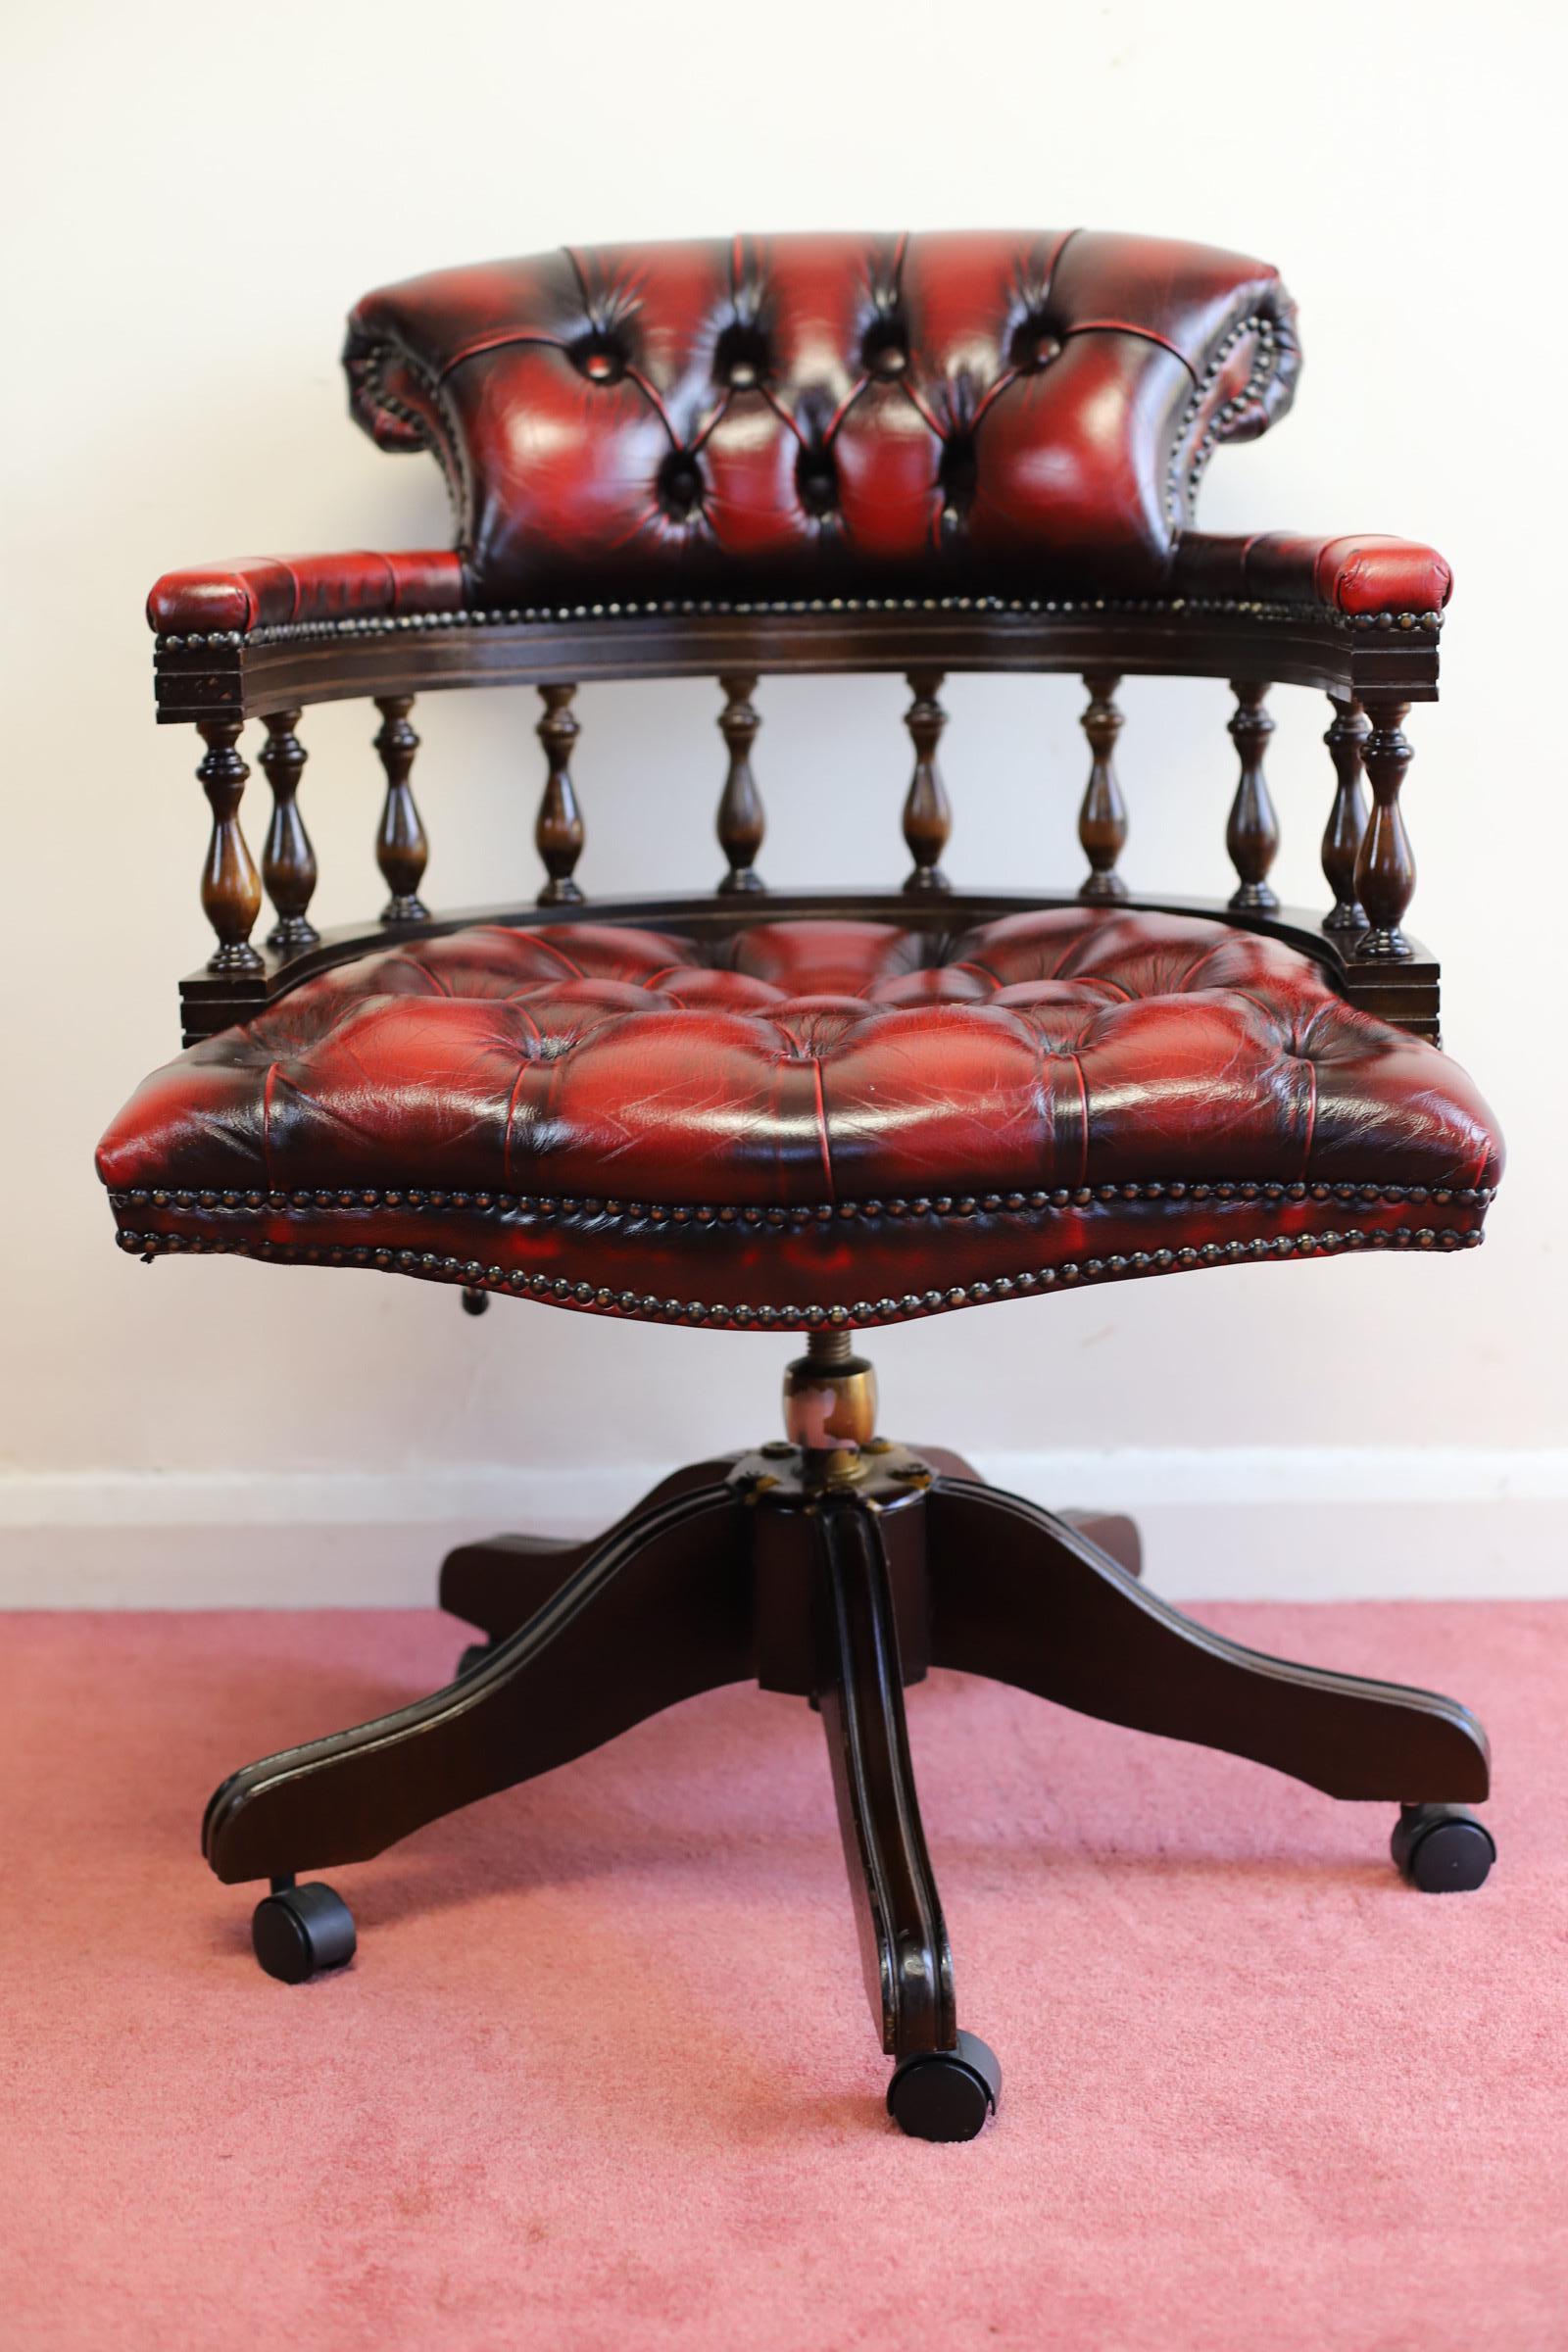 We delight to offer for sale this fantastic ox blood red captain deep buttoned swivel desk chair. This chair is in great condition with no tares, rips or buttons missing. The rise and fall action works well and it has a tilting action as well which